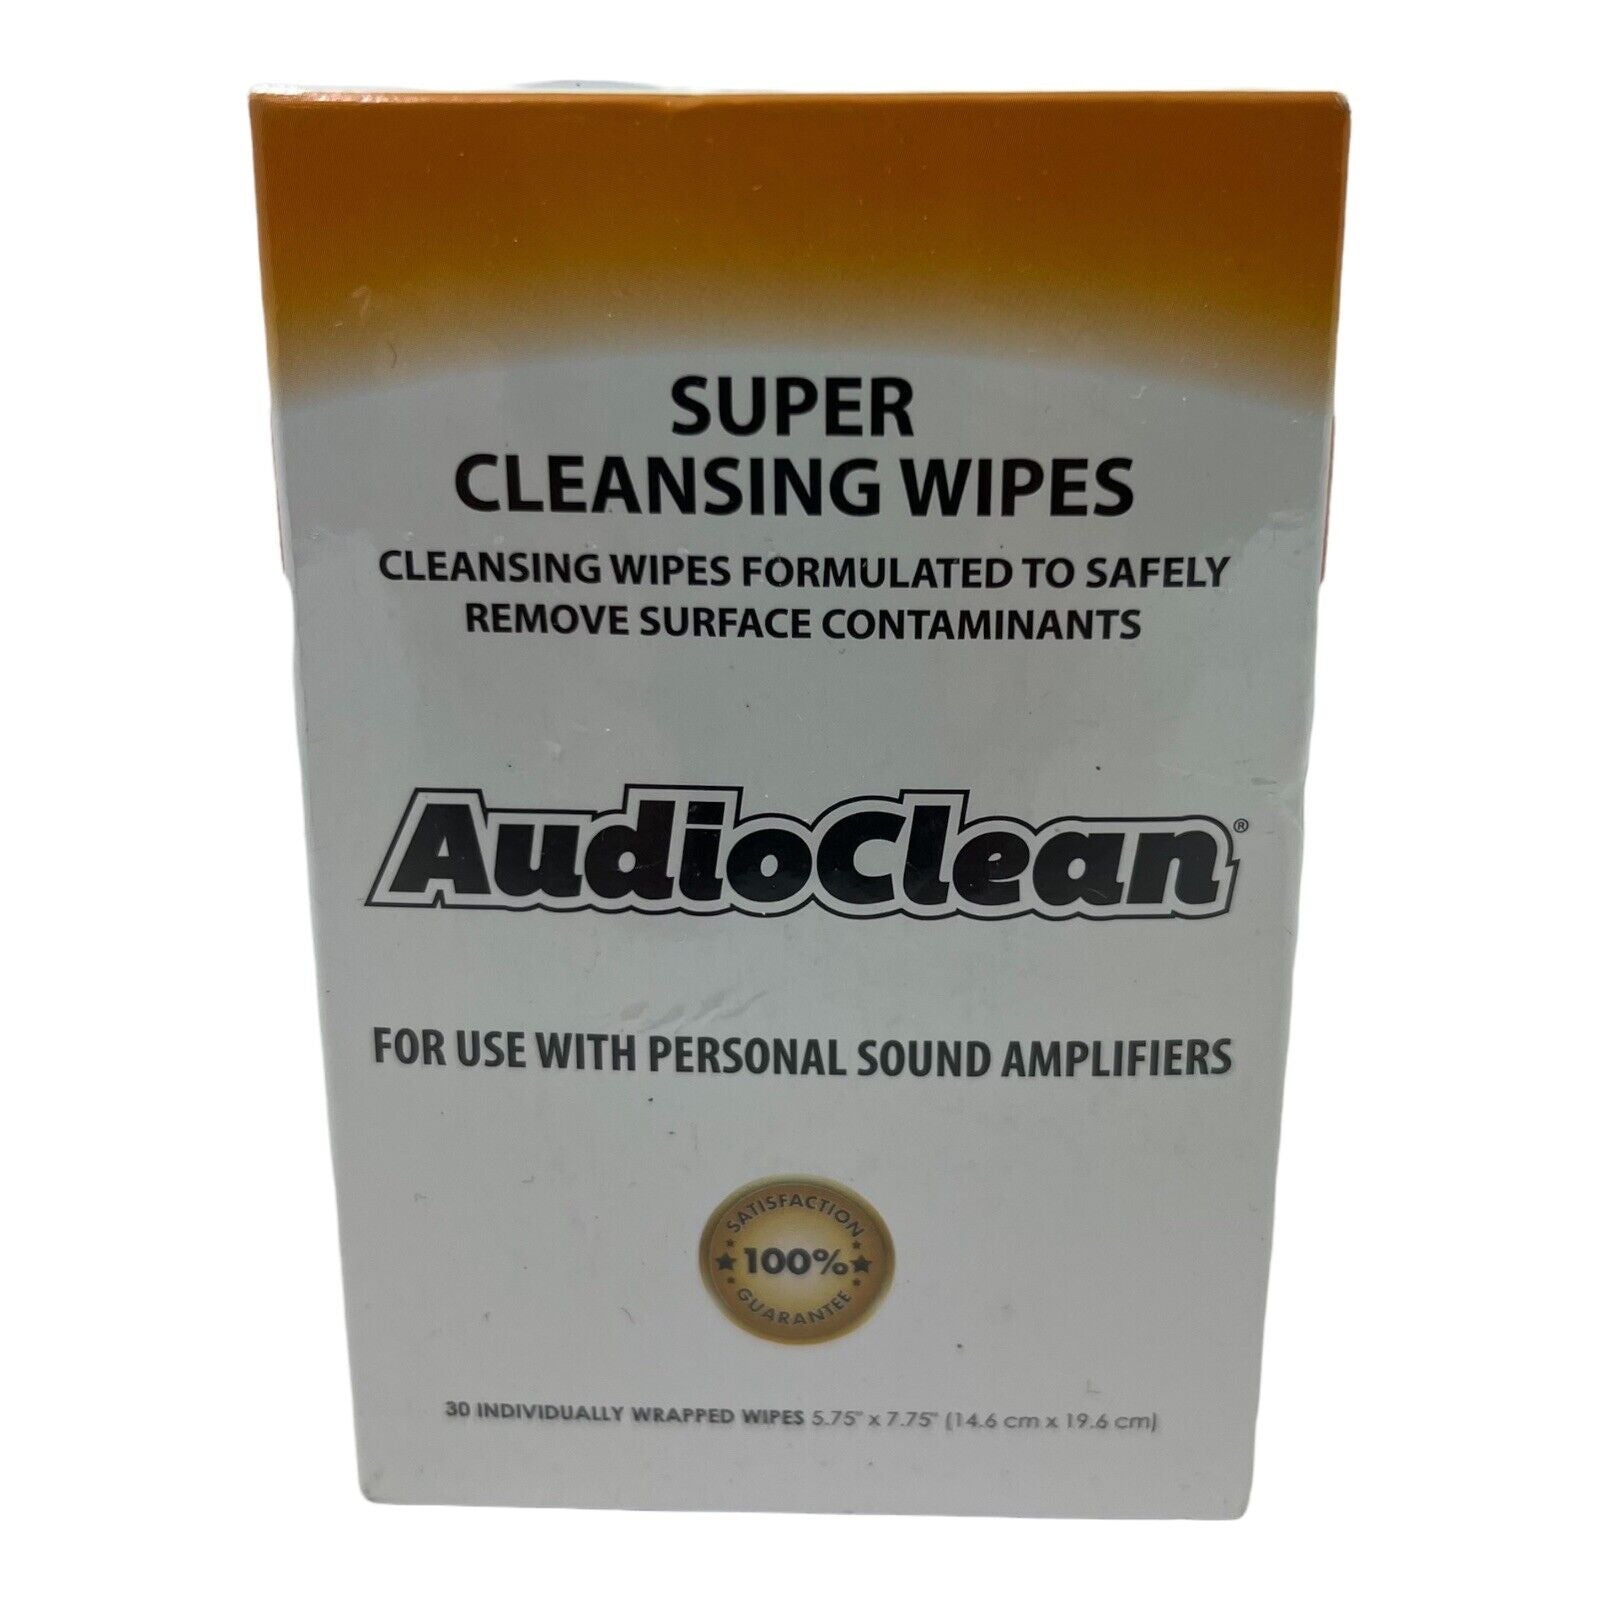 Audio Clean Super Cleansing Wipes for Personal Sound Amplifiers (30 Wipes)